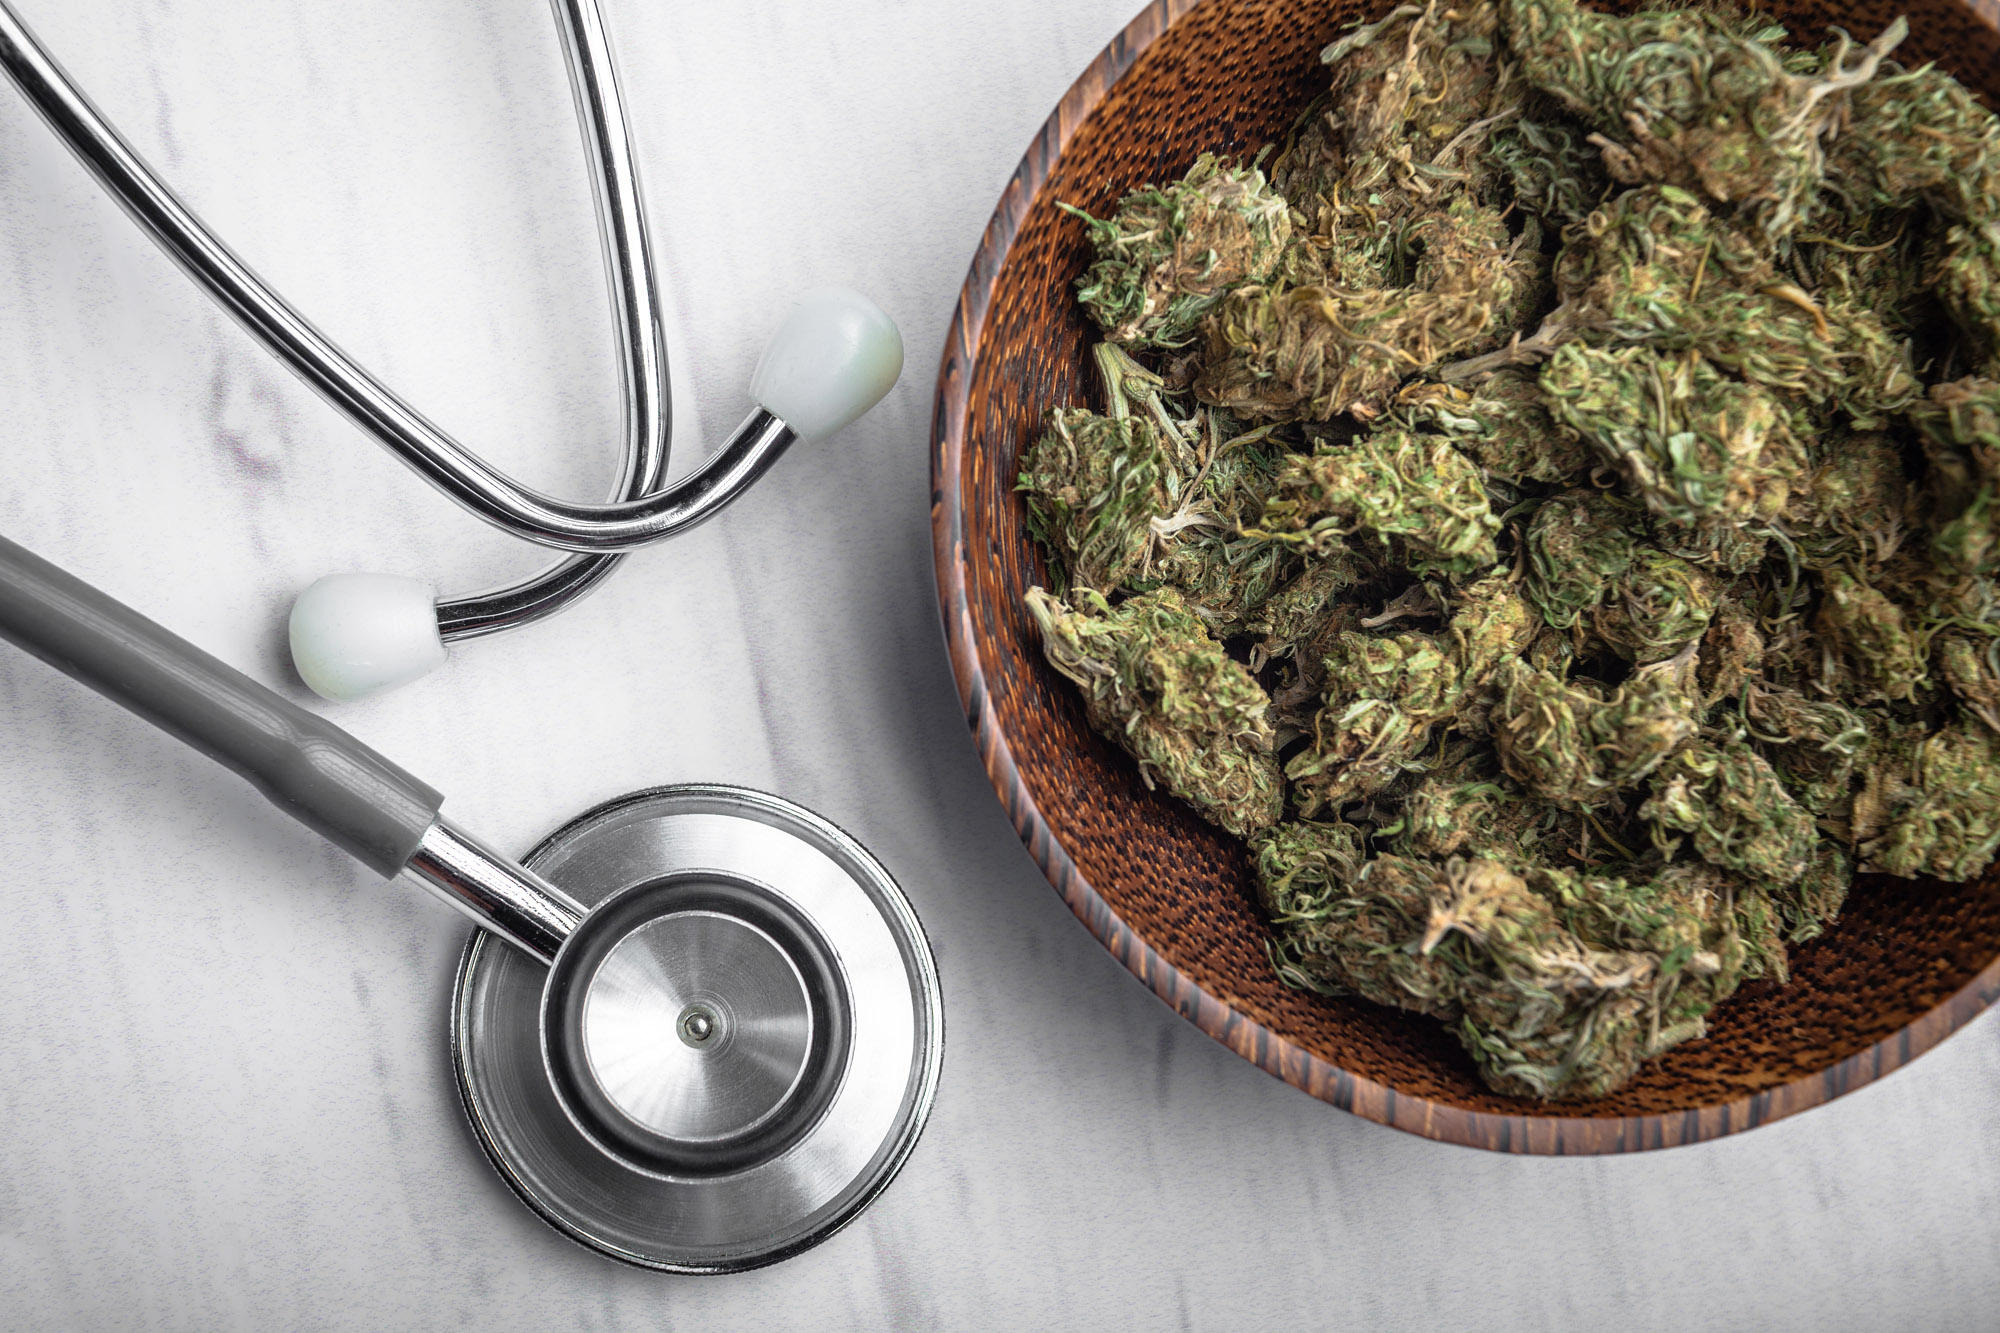 A Step By Step Guide to Securing Your Medical Marijuana Card